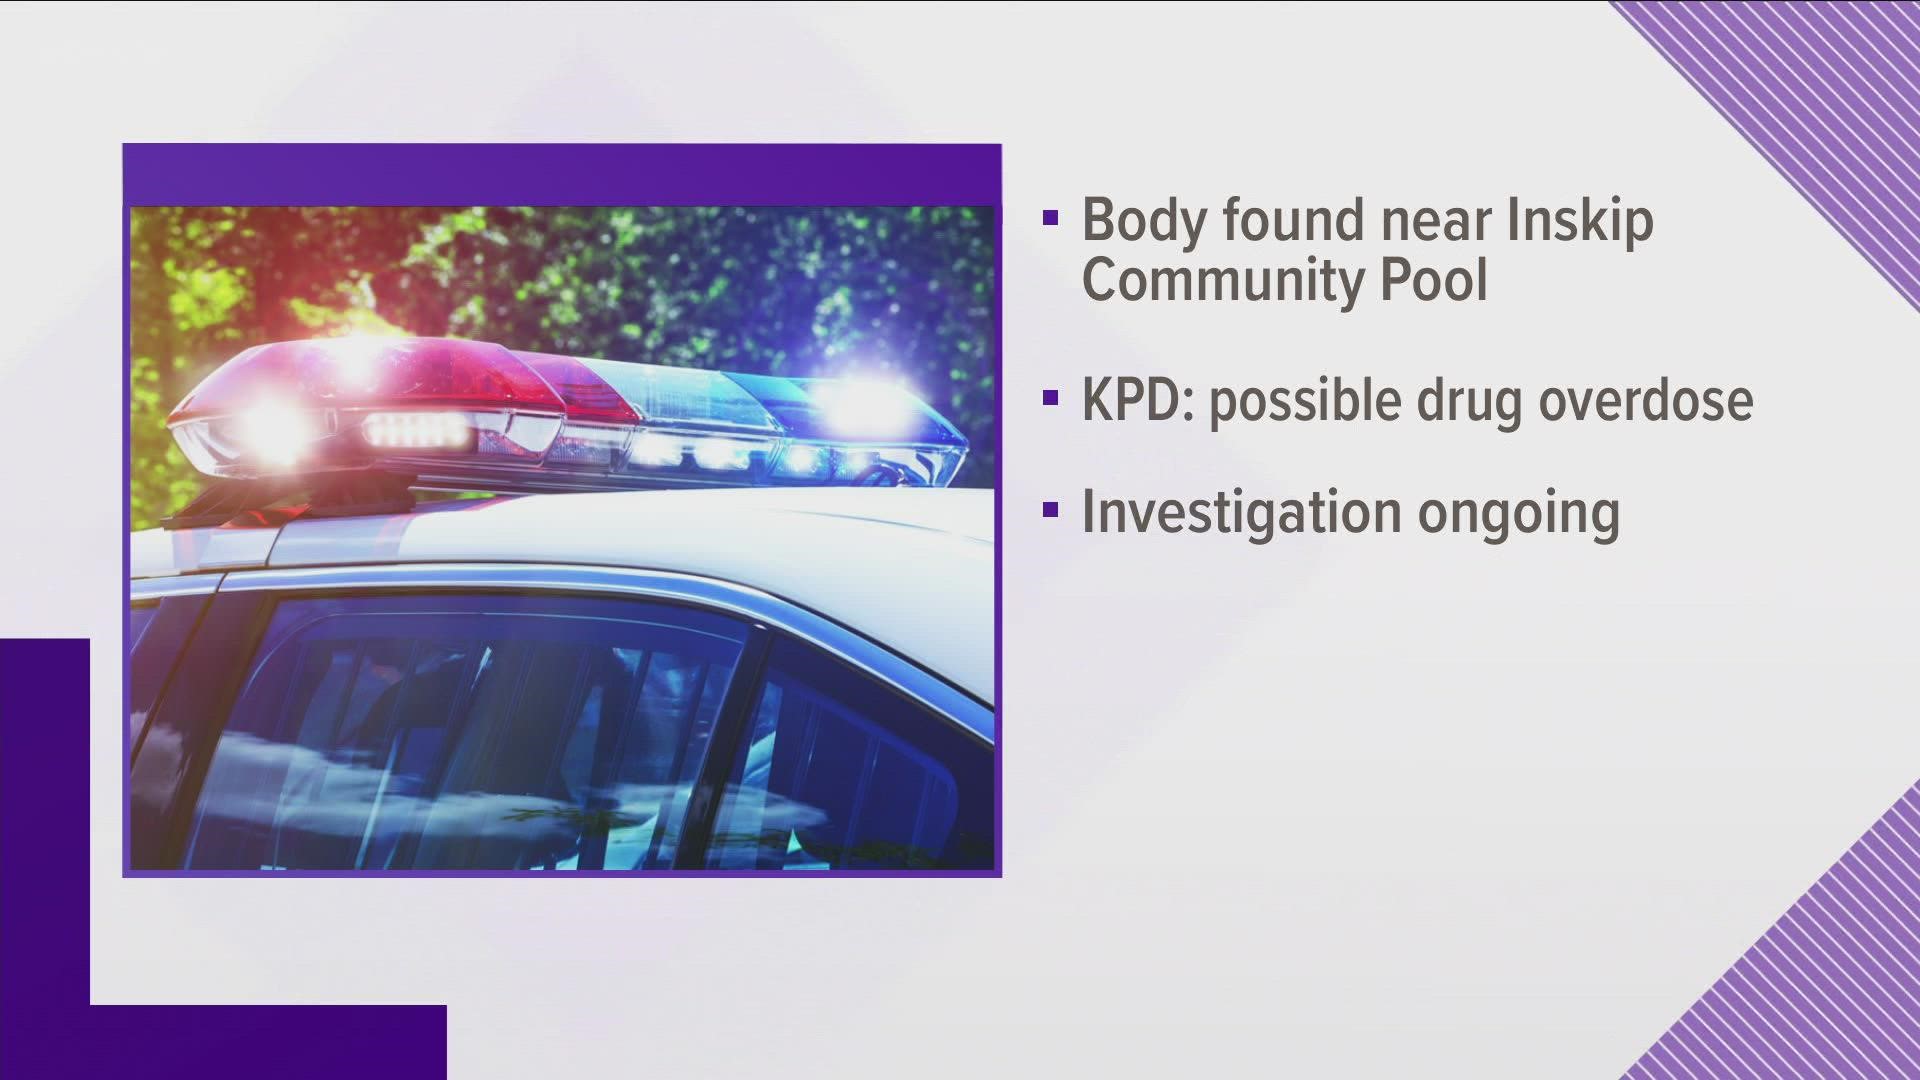 Police say that an early investigation points to a possible overdose.